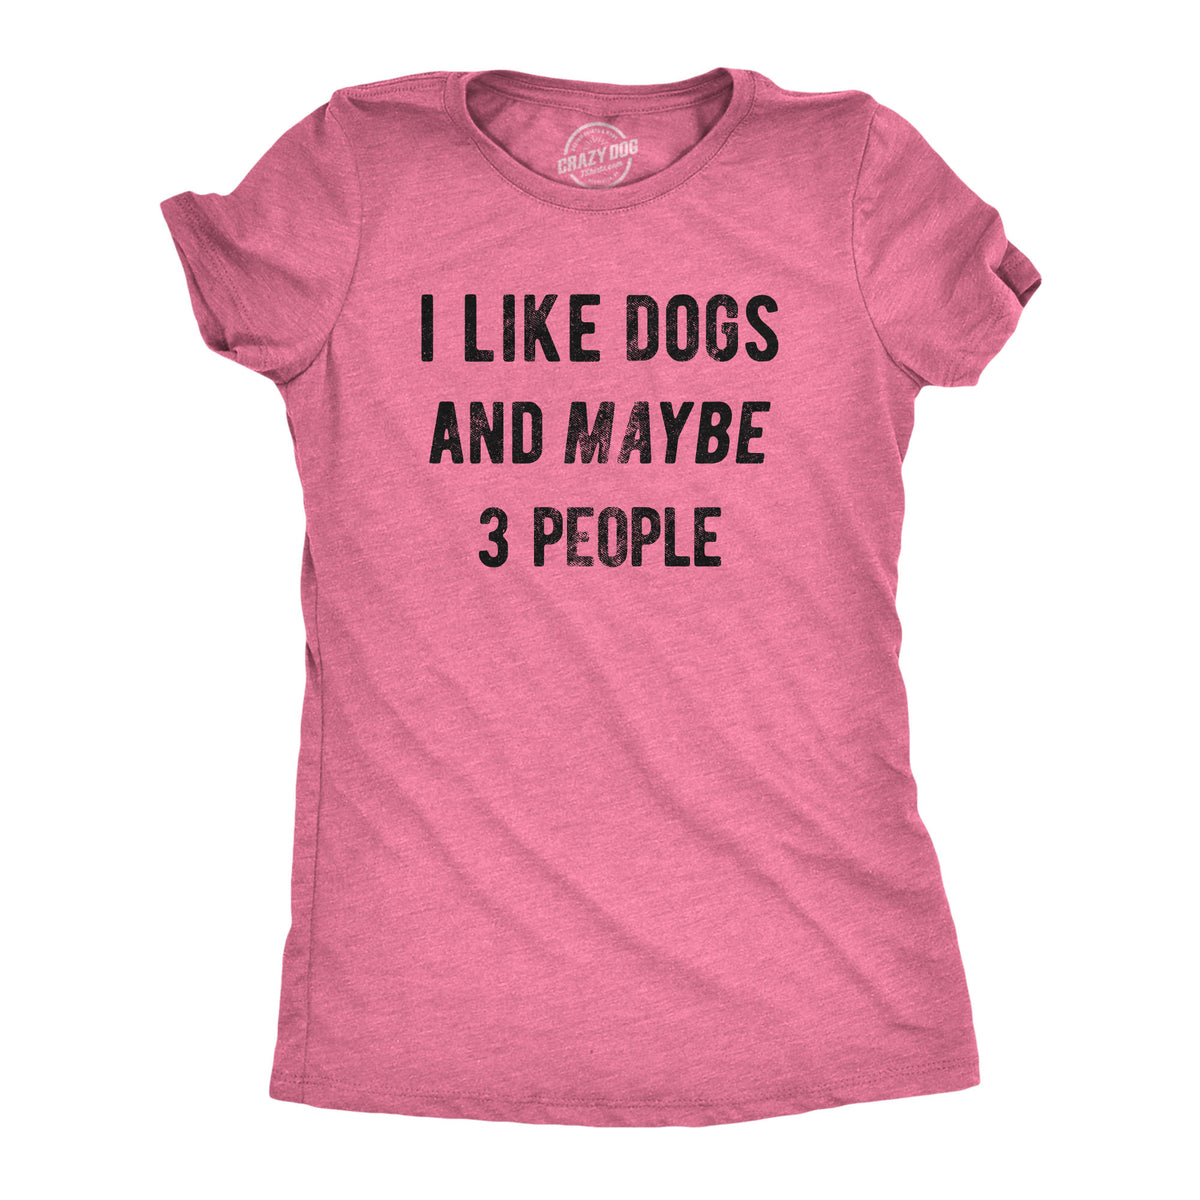 Funny Heather Pink I Like Dogs And Maybe 3 People Womens T Shirt Nerdy Dog Tee